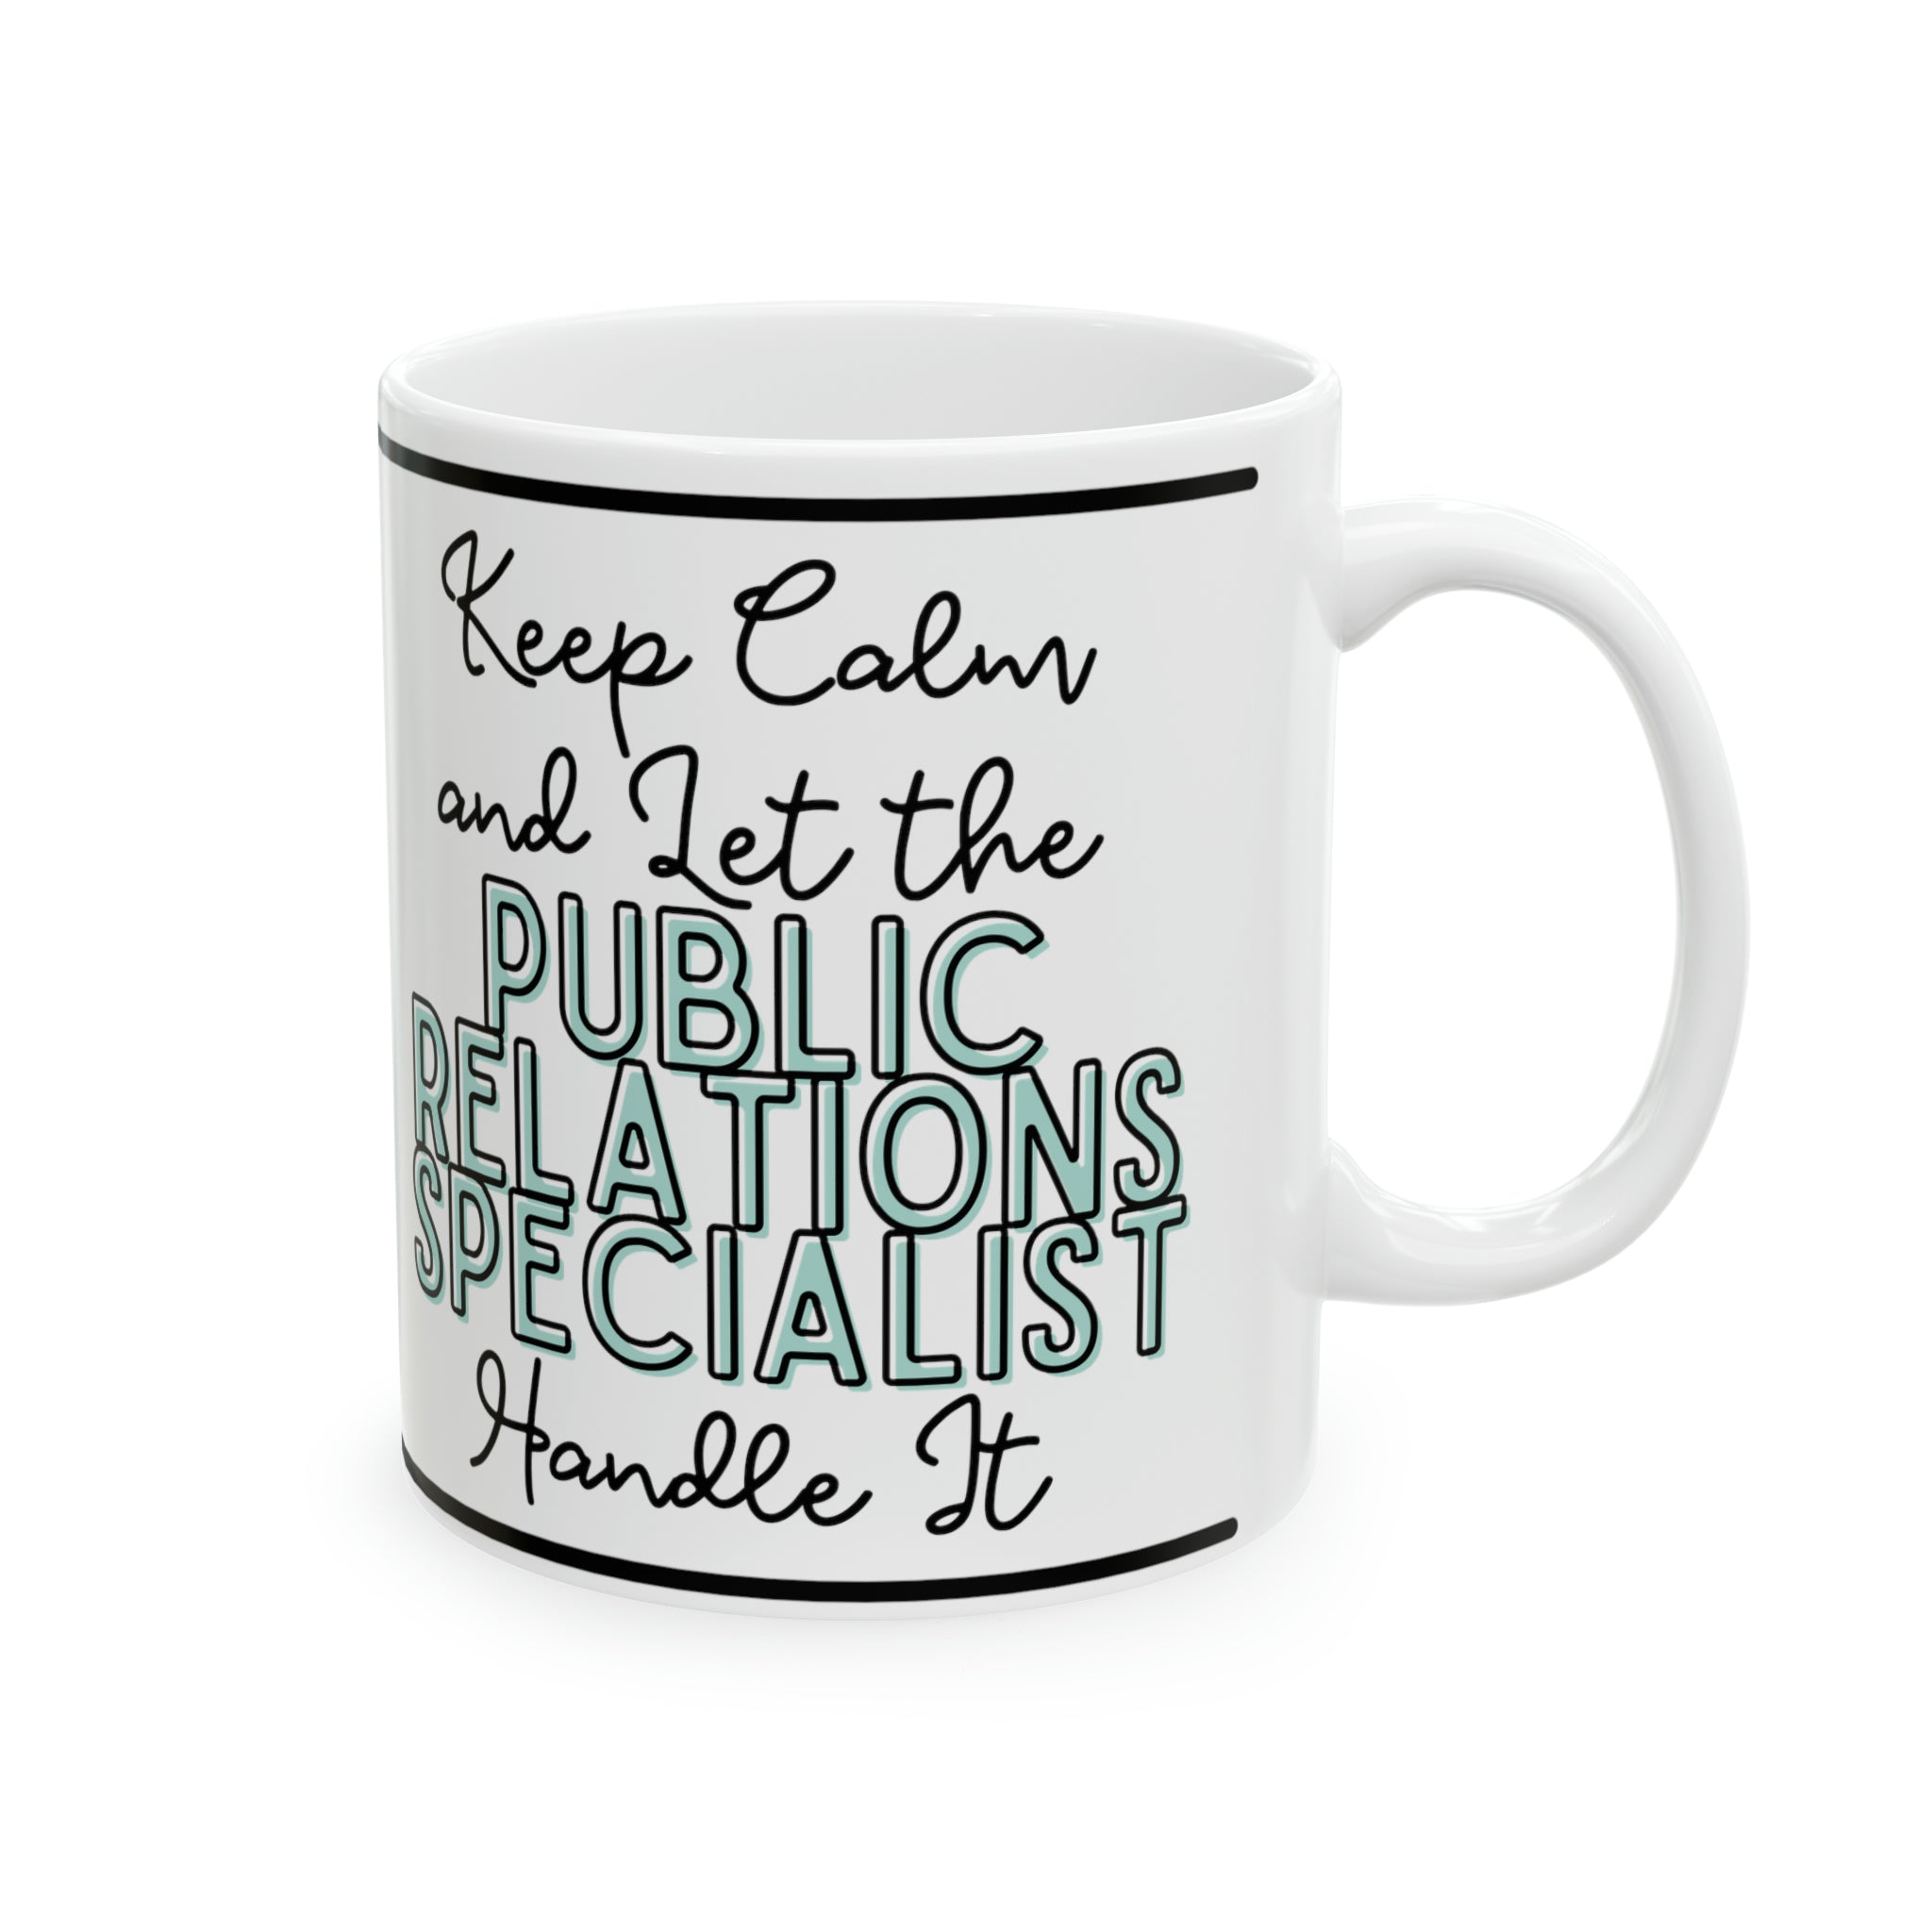 Keep Calm and let the Public Relations Specialist Handle It - Ceramic Mug, 11oz